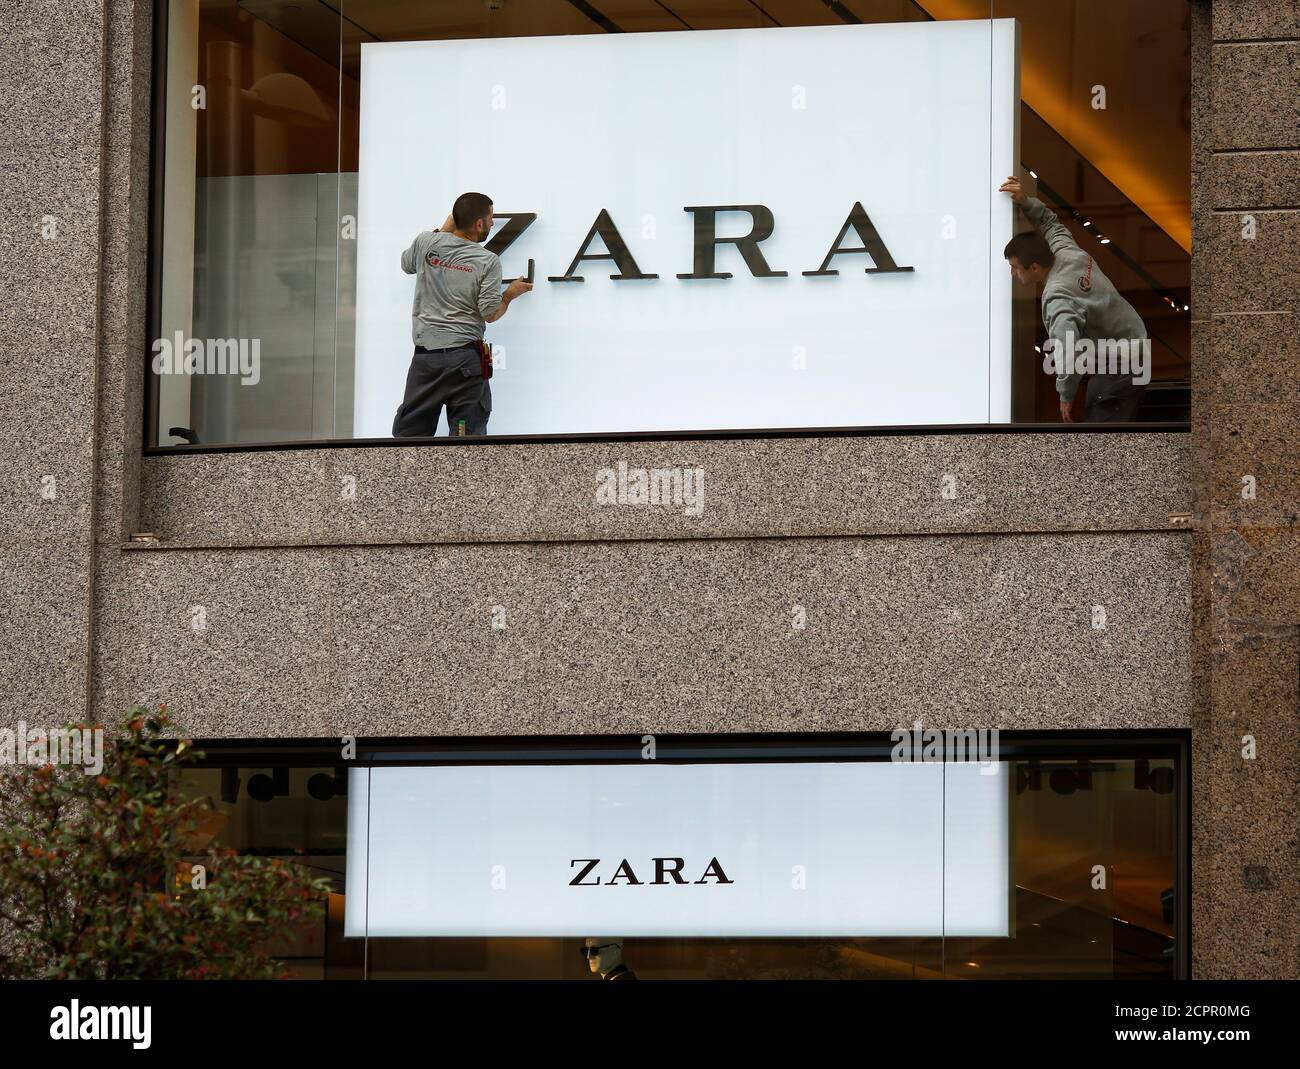 Workers put up the letters of the logo at a Zara store, an Inditex brand,  in Madrid, Spain, March 9, 2016. REUTERS/Paul Hanna Stock Photo - Alamy